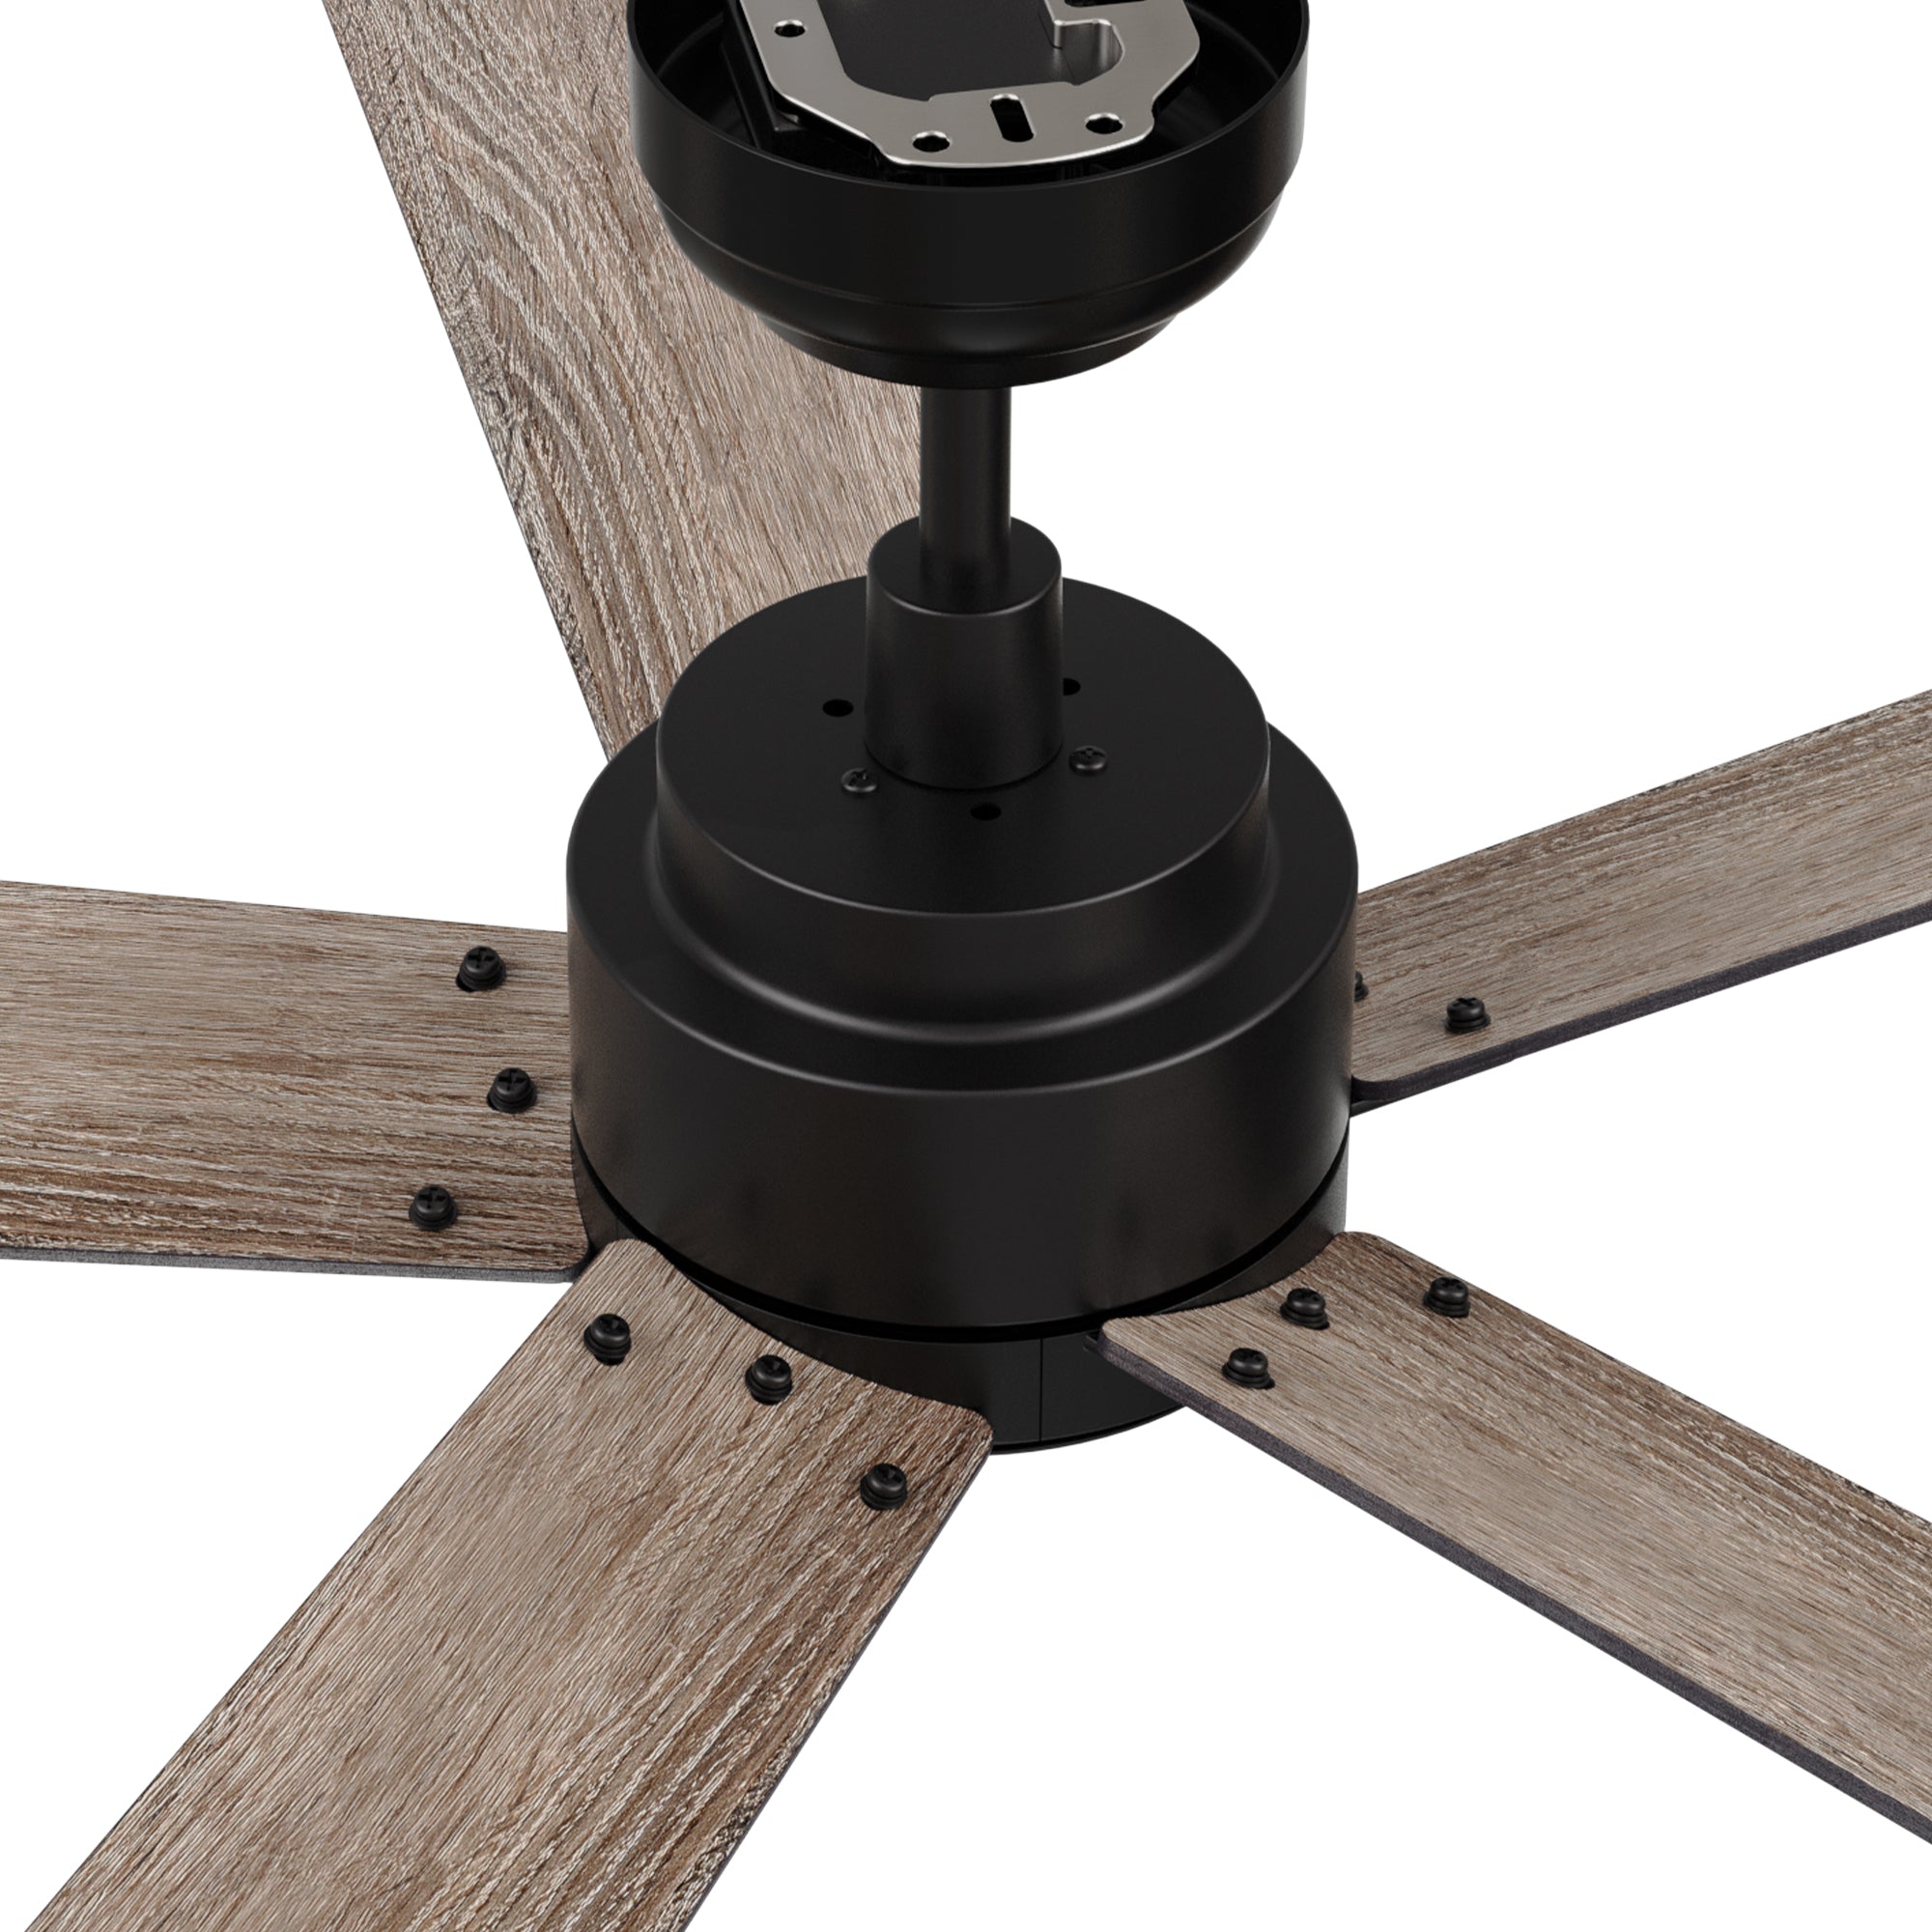 Carro Welland 60 inch remote control ceiling fans boasts a simple design with a Black finish and elegant Plywood blades, Fans are made with incredibly efficient and completely silent DC motors. #color_Black